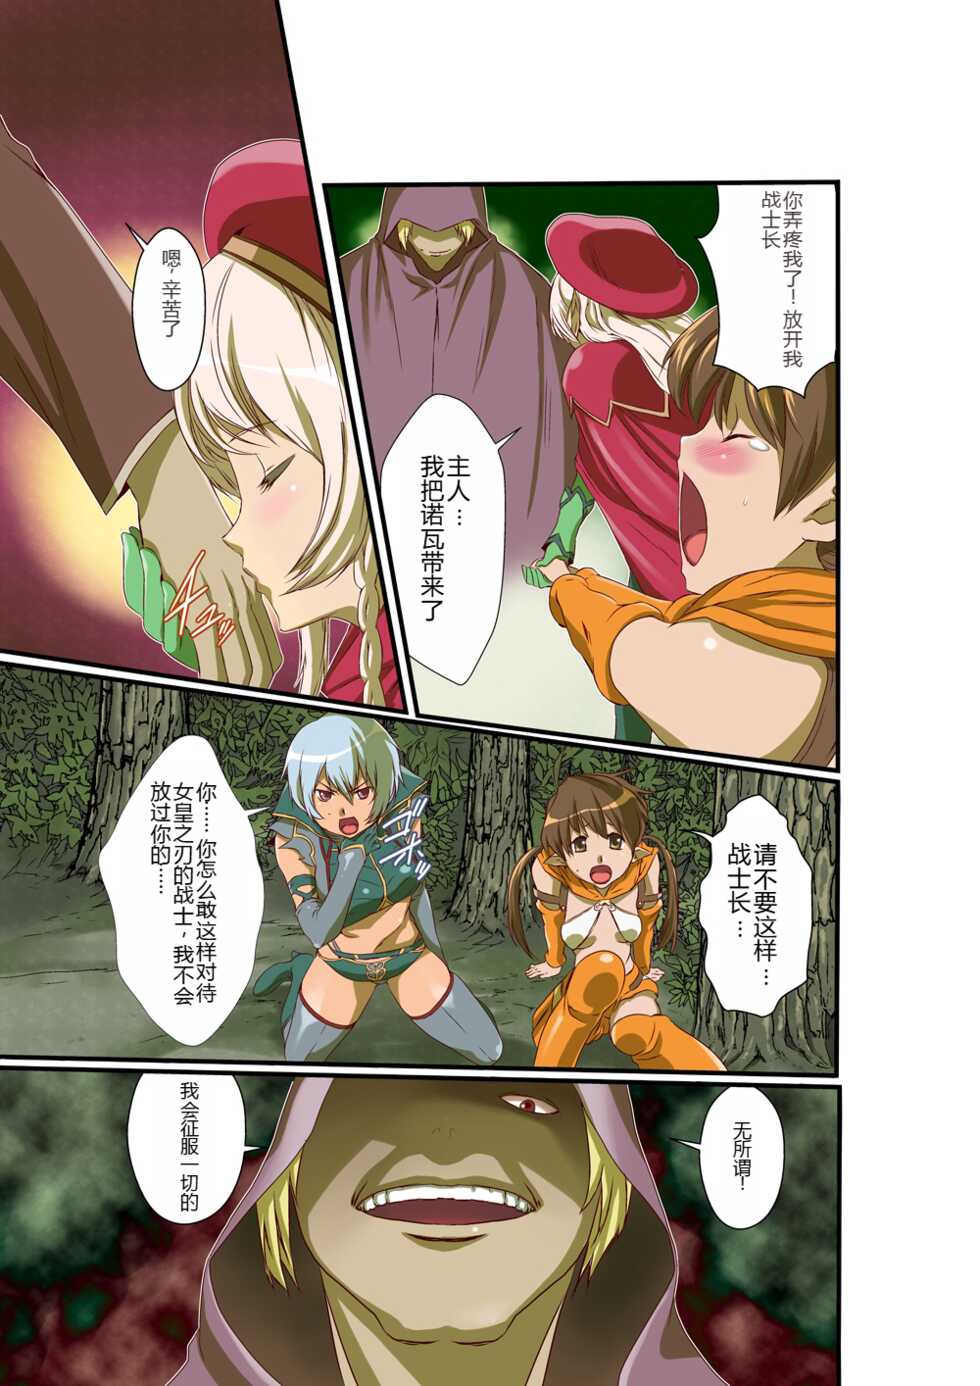 [Utsuro na Hitomi] Queen's *lade Mind-control Manga (Queen's Blade) [chinese] [lalala1234个人机翻汉化] - Page 13